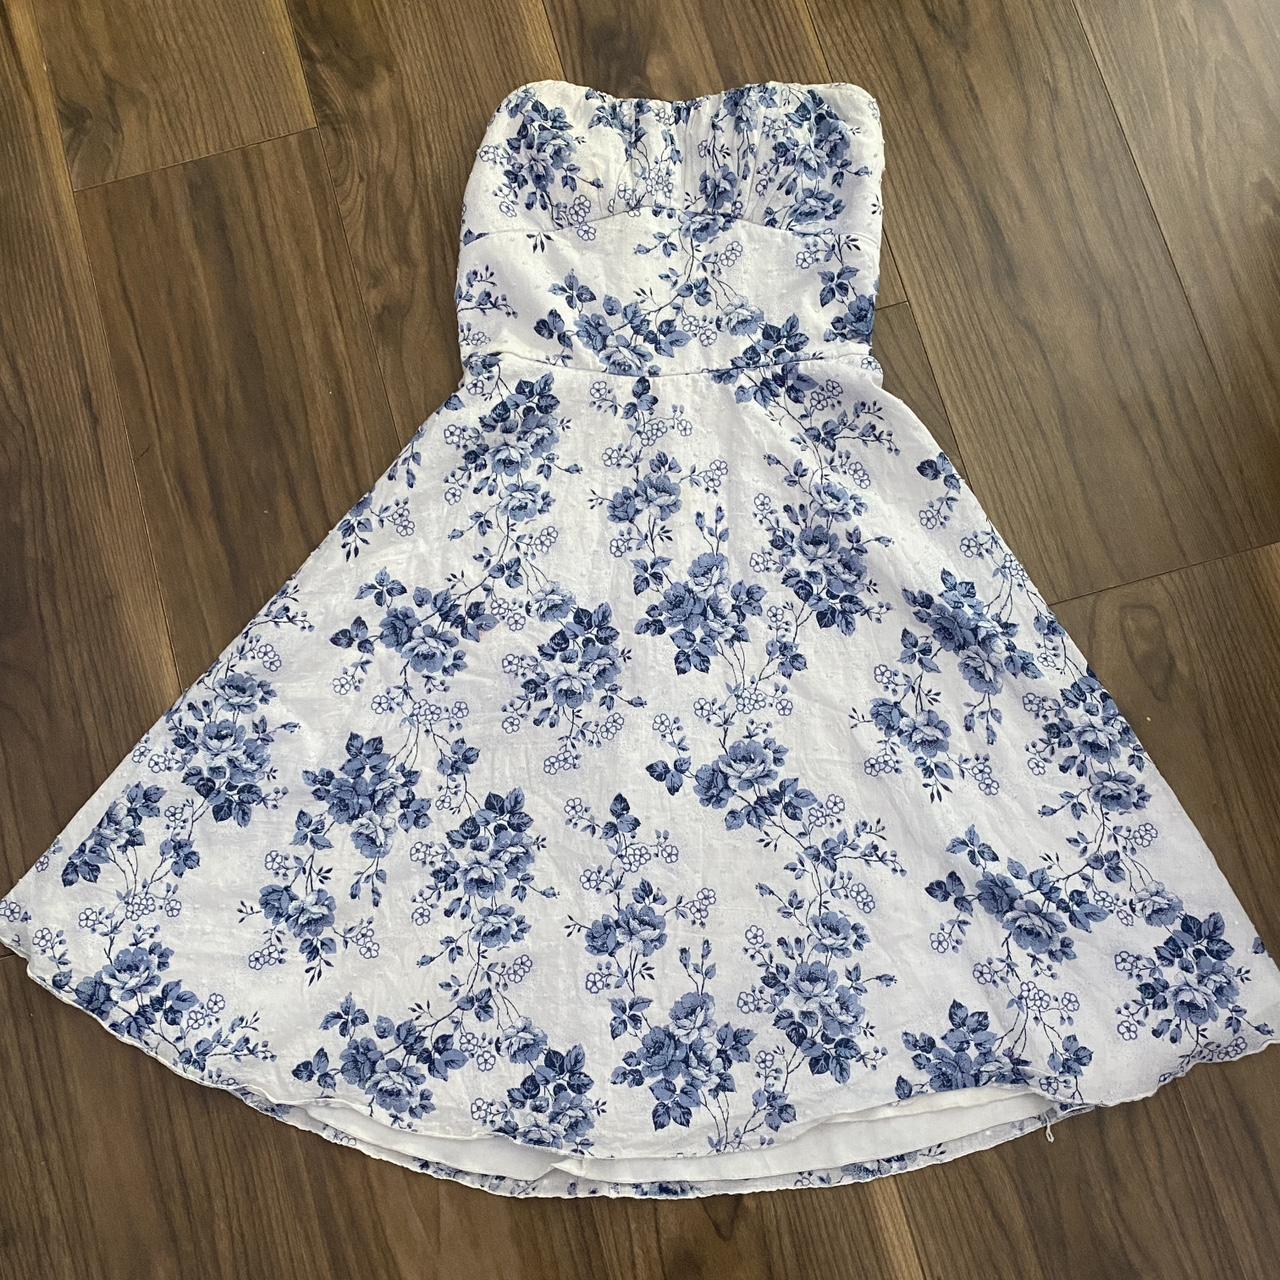 Blue and white floral tube dress - Depop